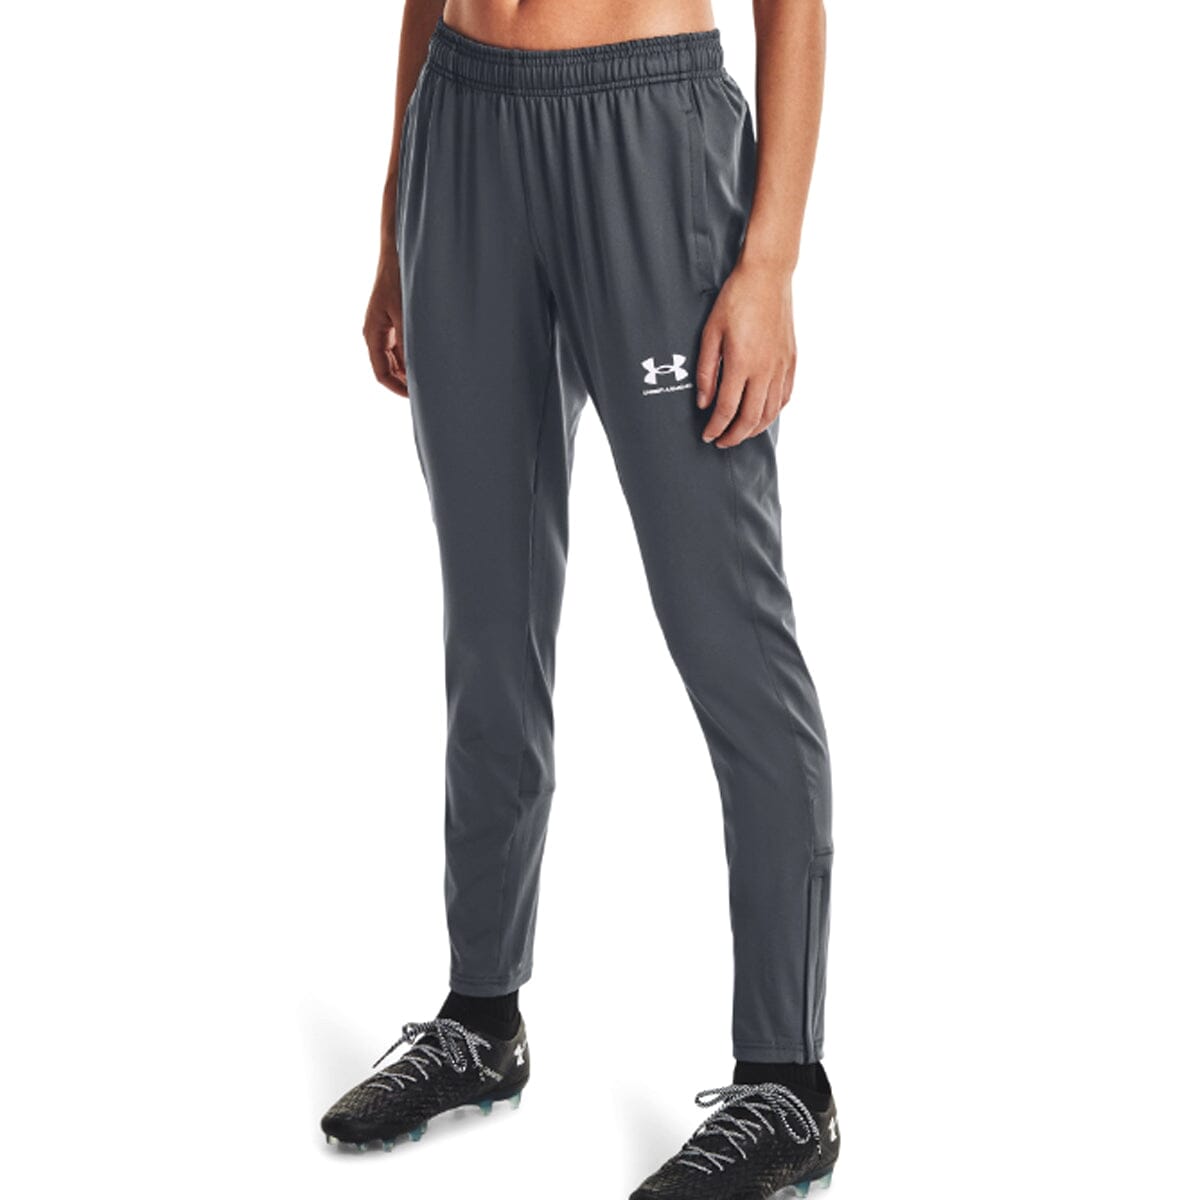 Under Armour Challenger Training Pant Granite / White - Free delivery